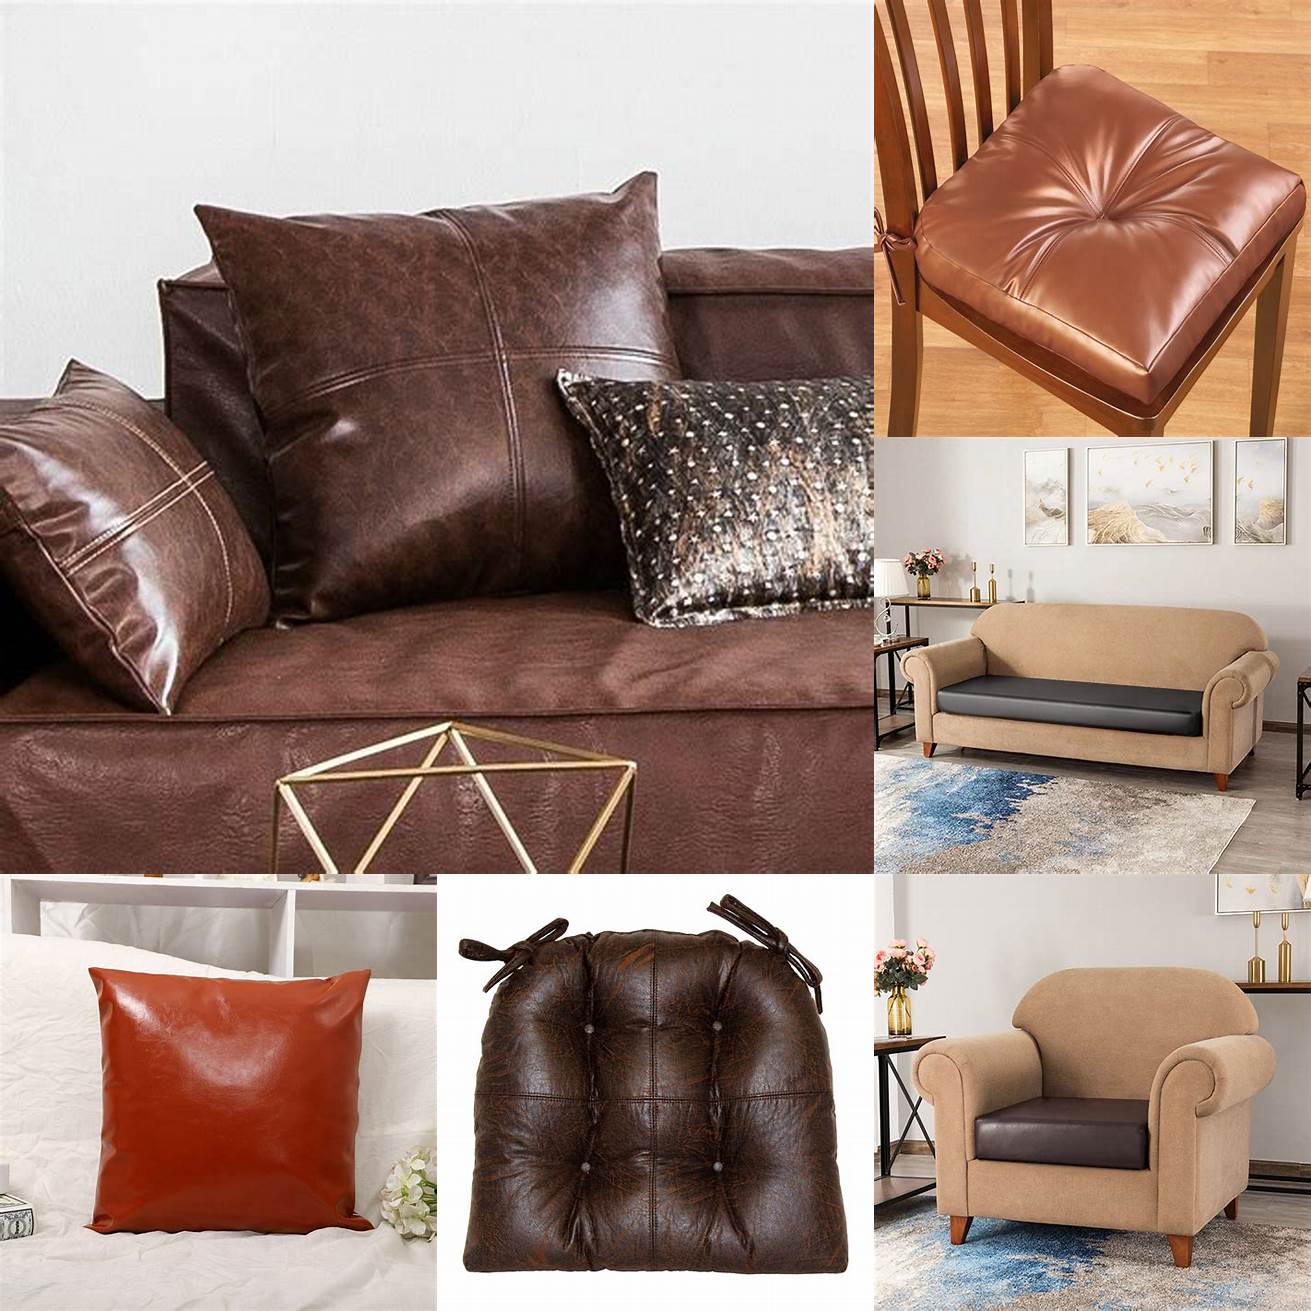 Faux leather cushions